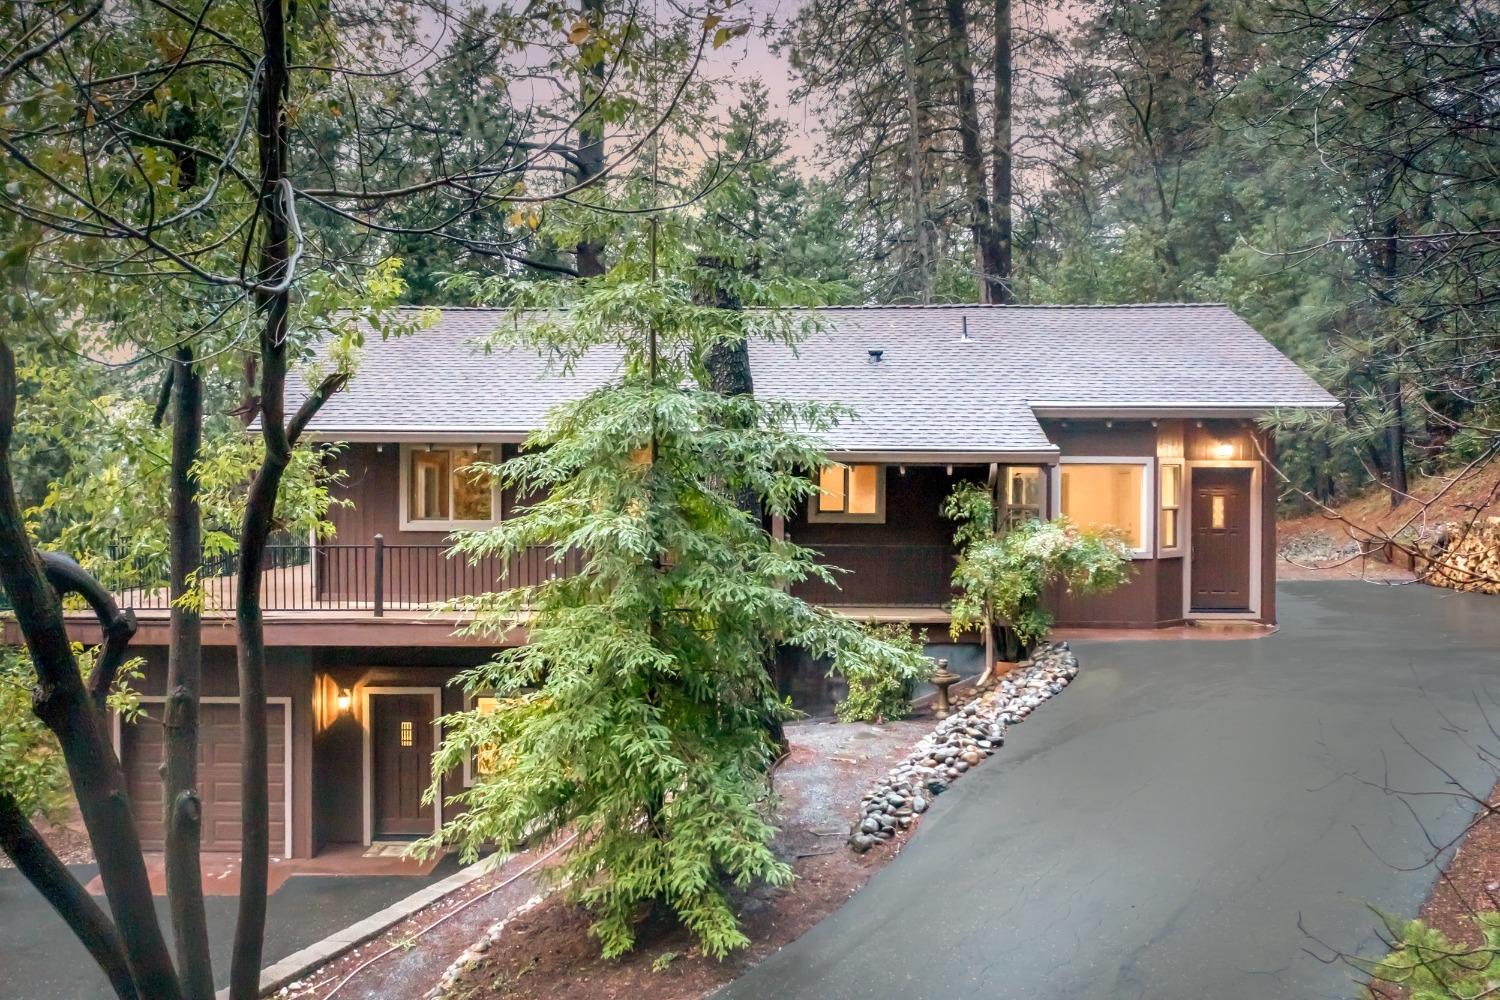 Photo of 10826 Bubbling Wells Rd in Grass Valley, CA